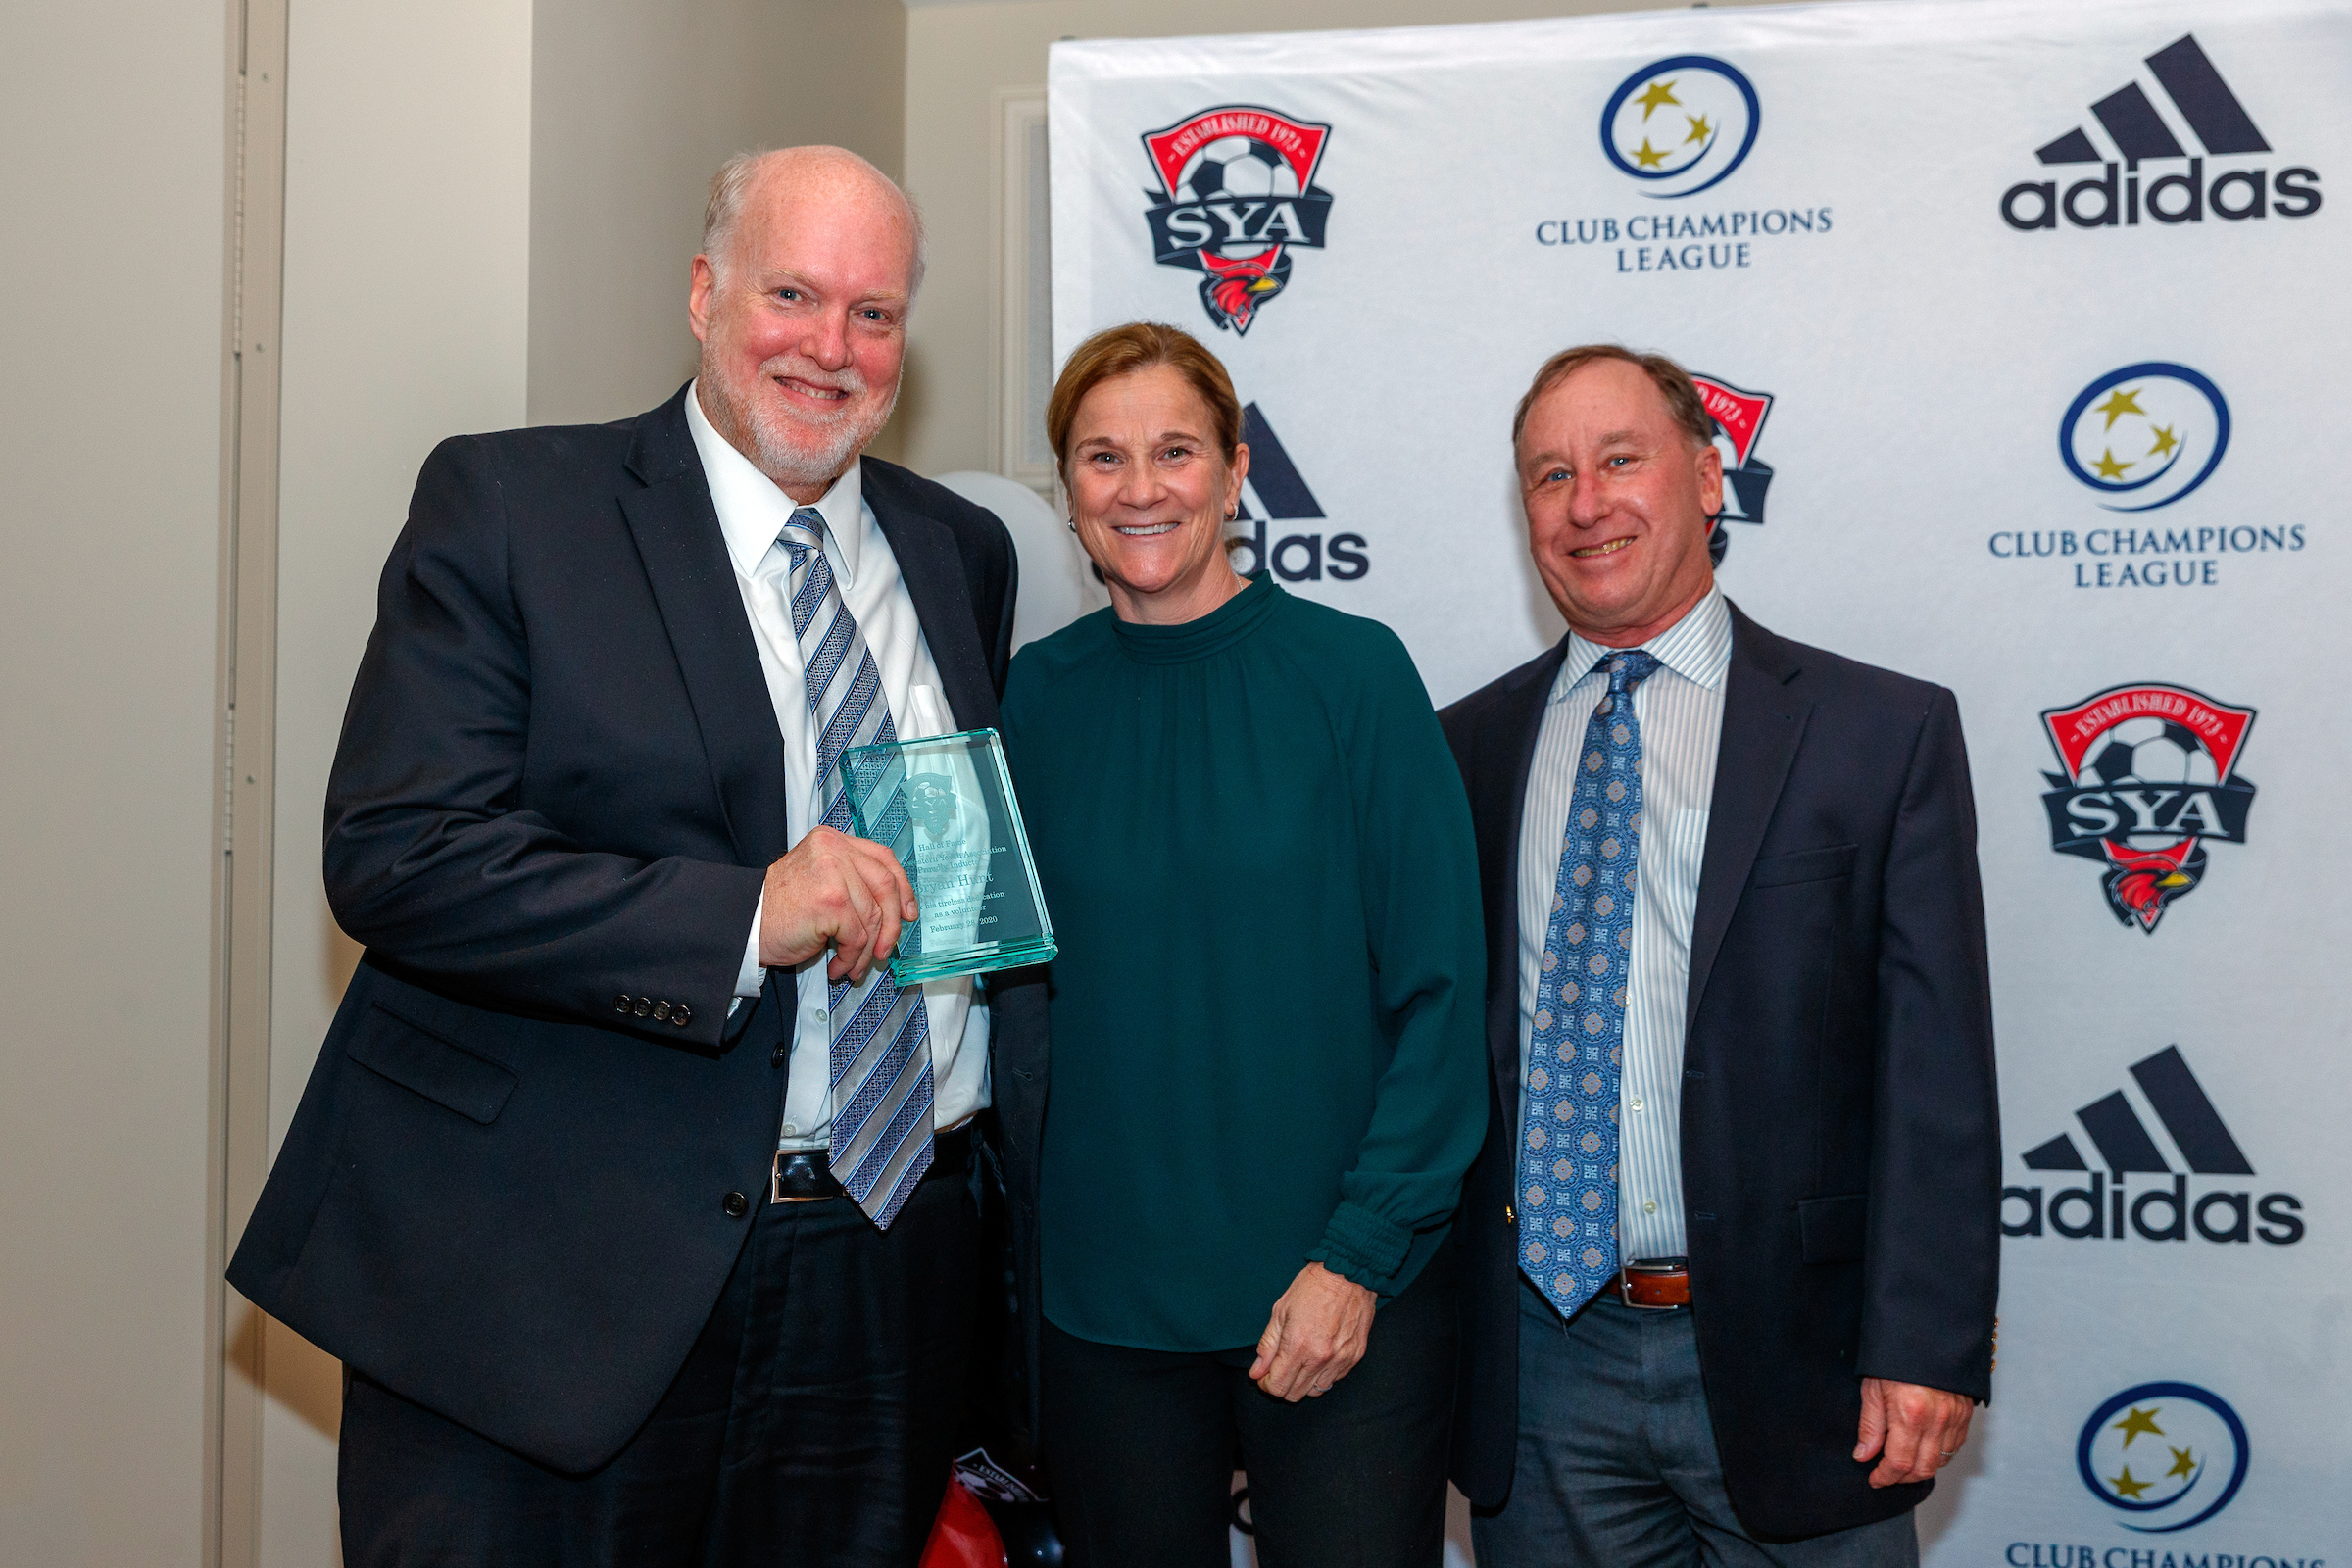 (L to R) Hall of Fame Inductee - Brian Hunt, 2 Time World Cup Champion - Jill Ellis, 2020 SYA President - Jeff Stein